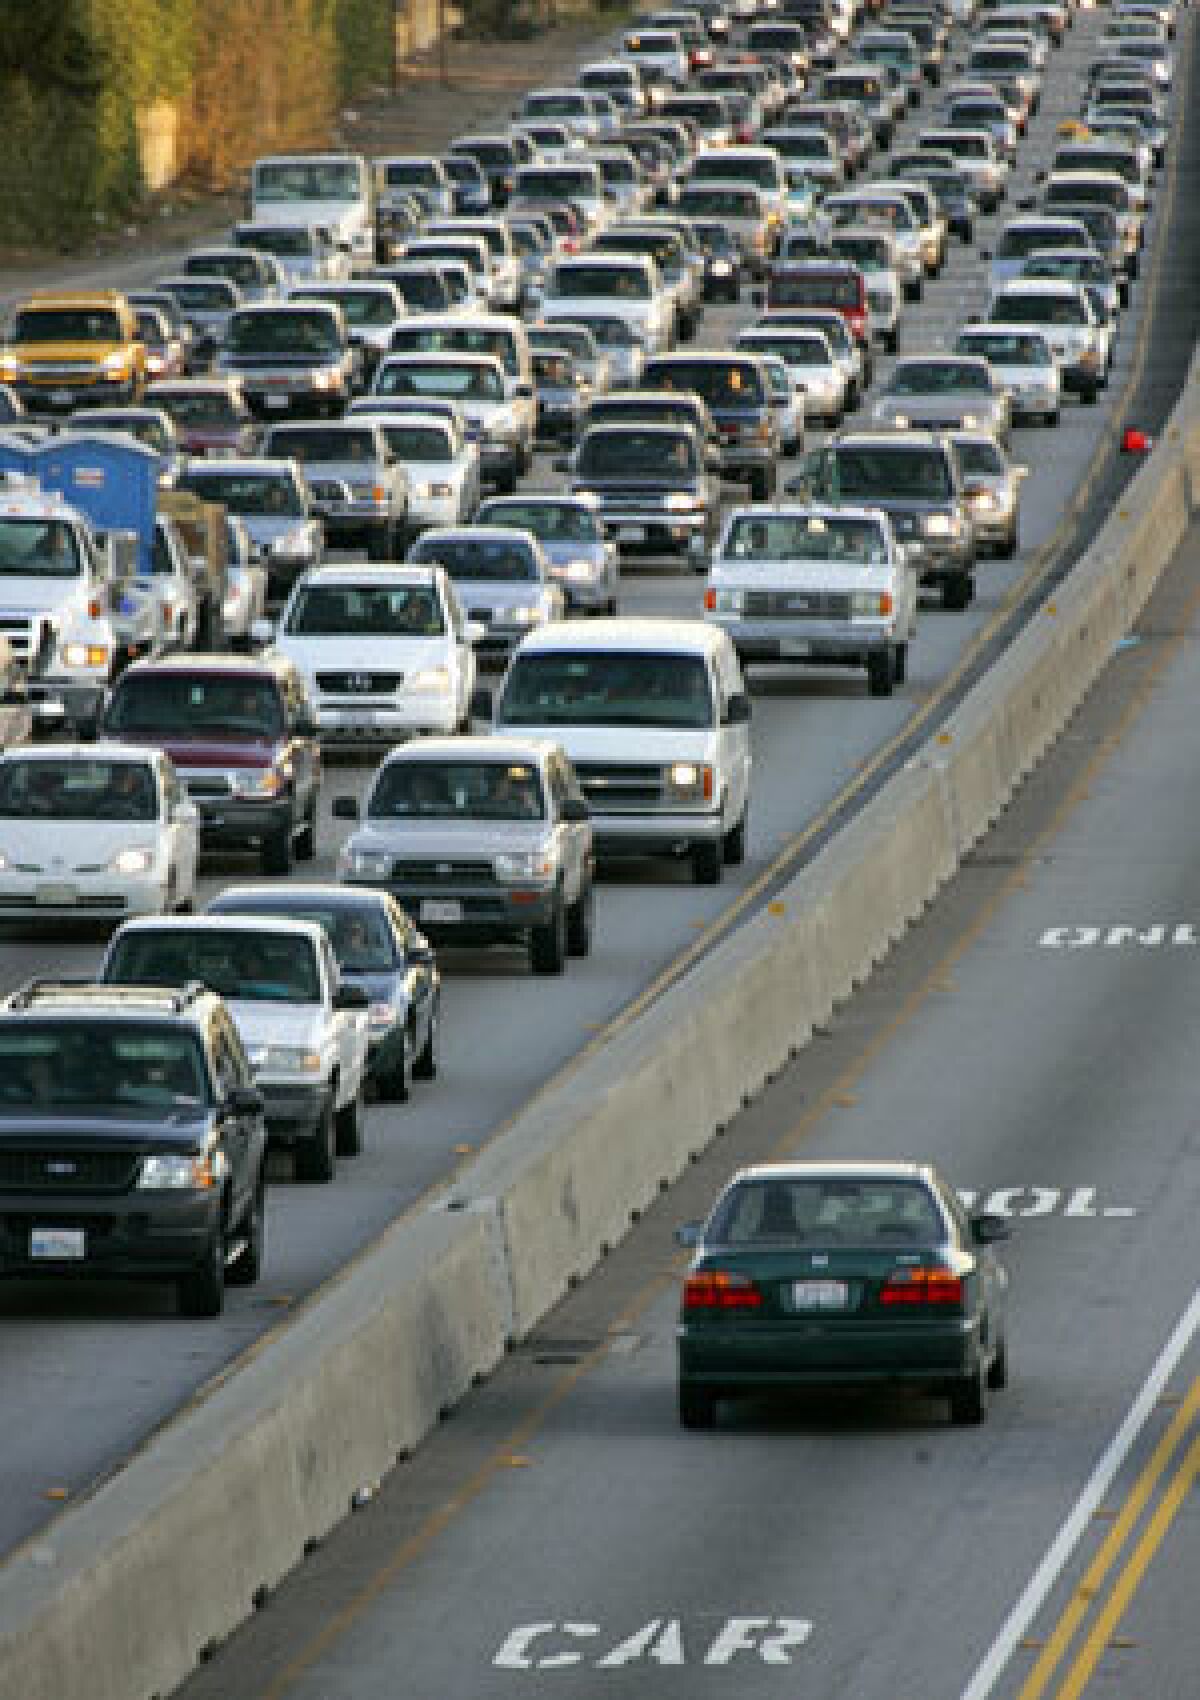 BARELY MOVING: Gridlock on the 405 is a familiar sight. County officials propose converting some carpool lanes to toll lanes, but the 405 is not included in the initial plan.